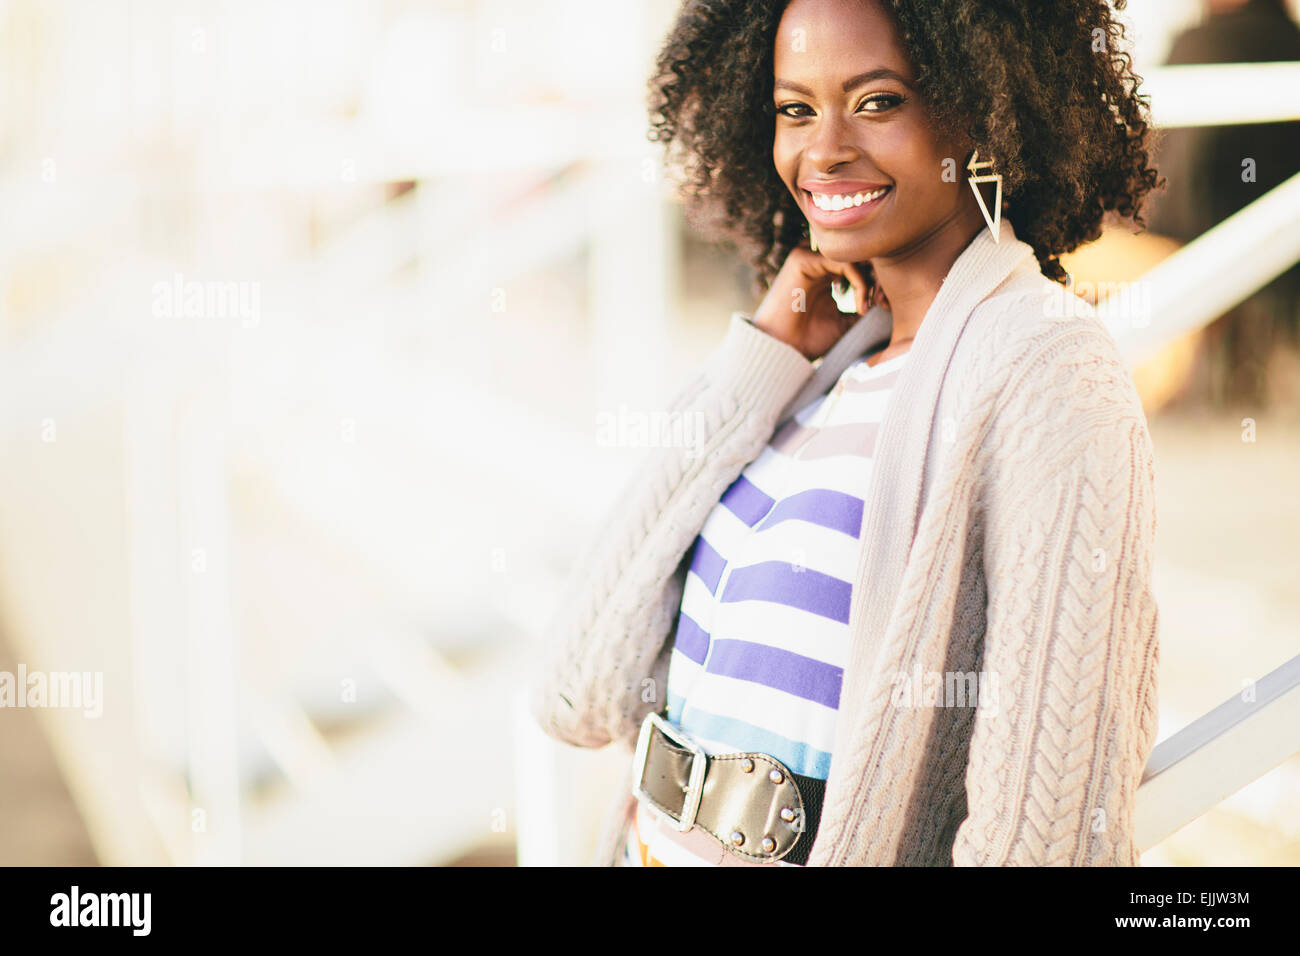 Young black woman on the street Stock Photo